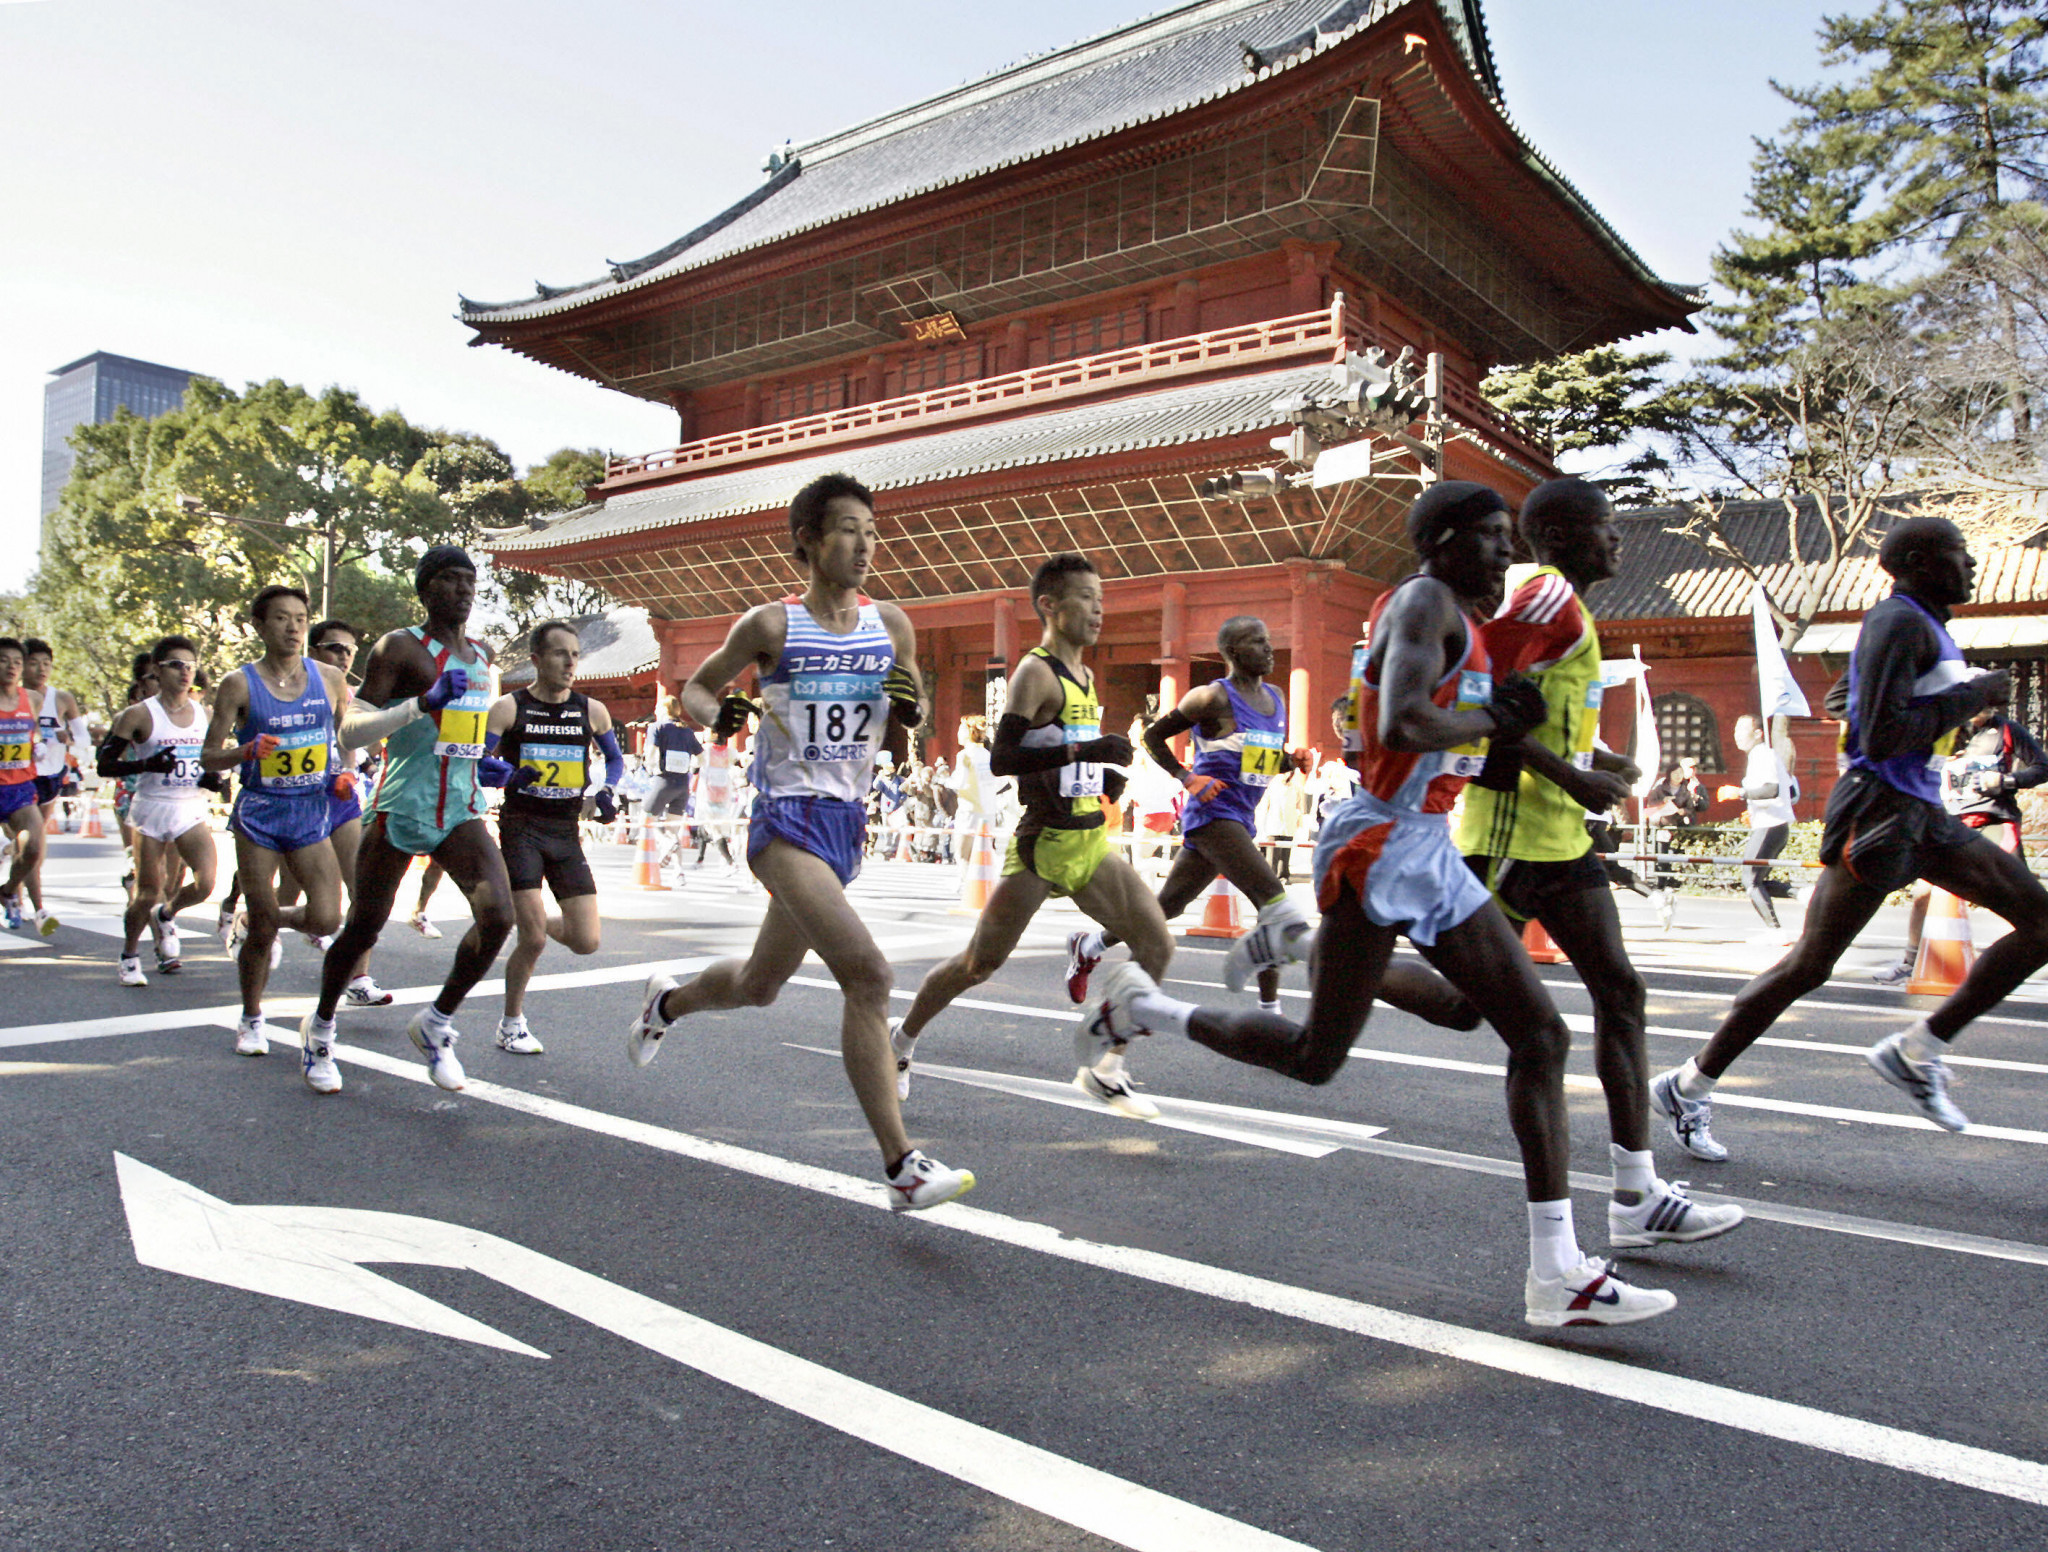 Next Tokyo Marathon given October 2021 date, after Olympic Games